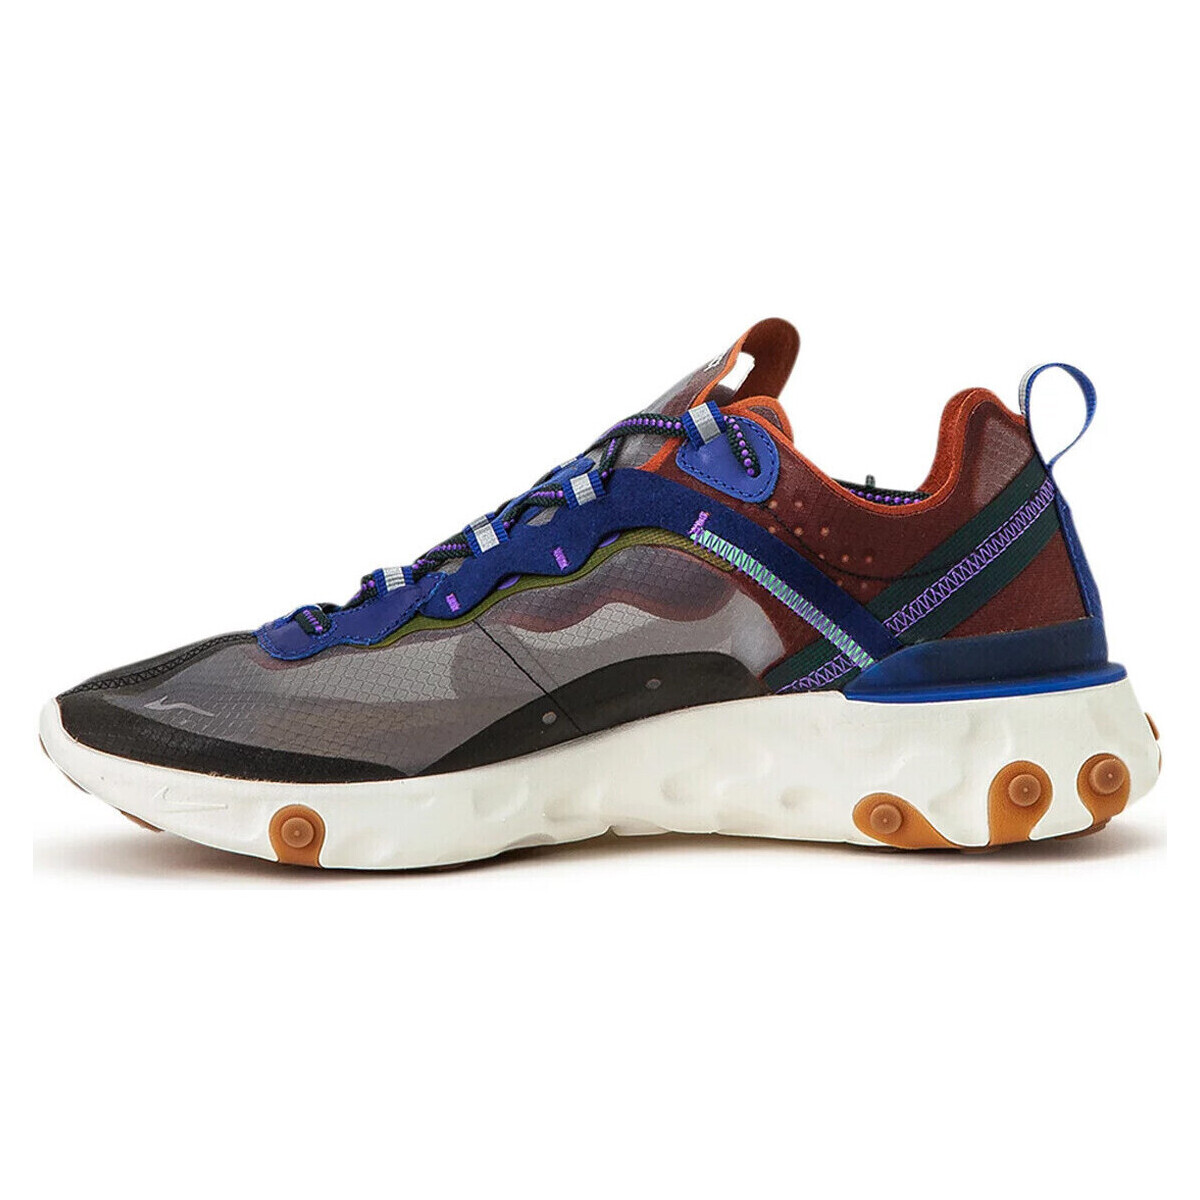 Chaussures Homme nike air thera leather REACT ELEMENT 87 Marron